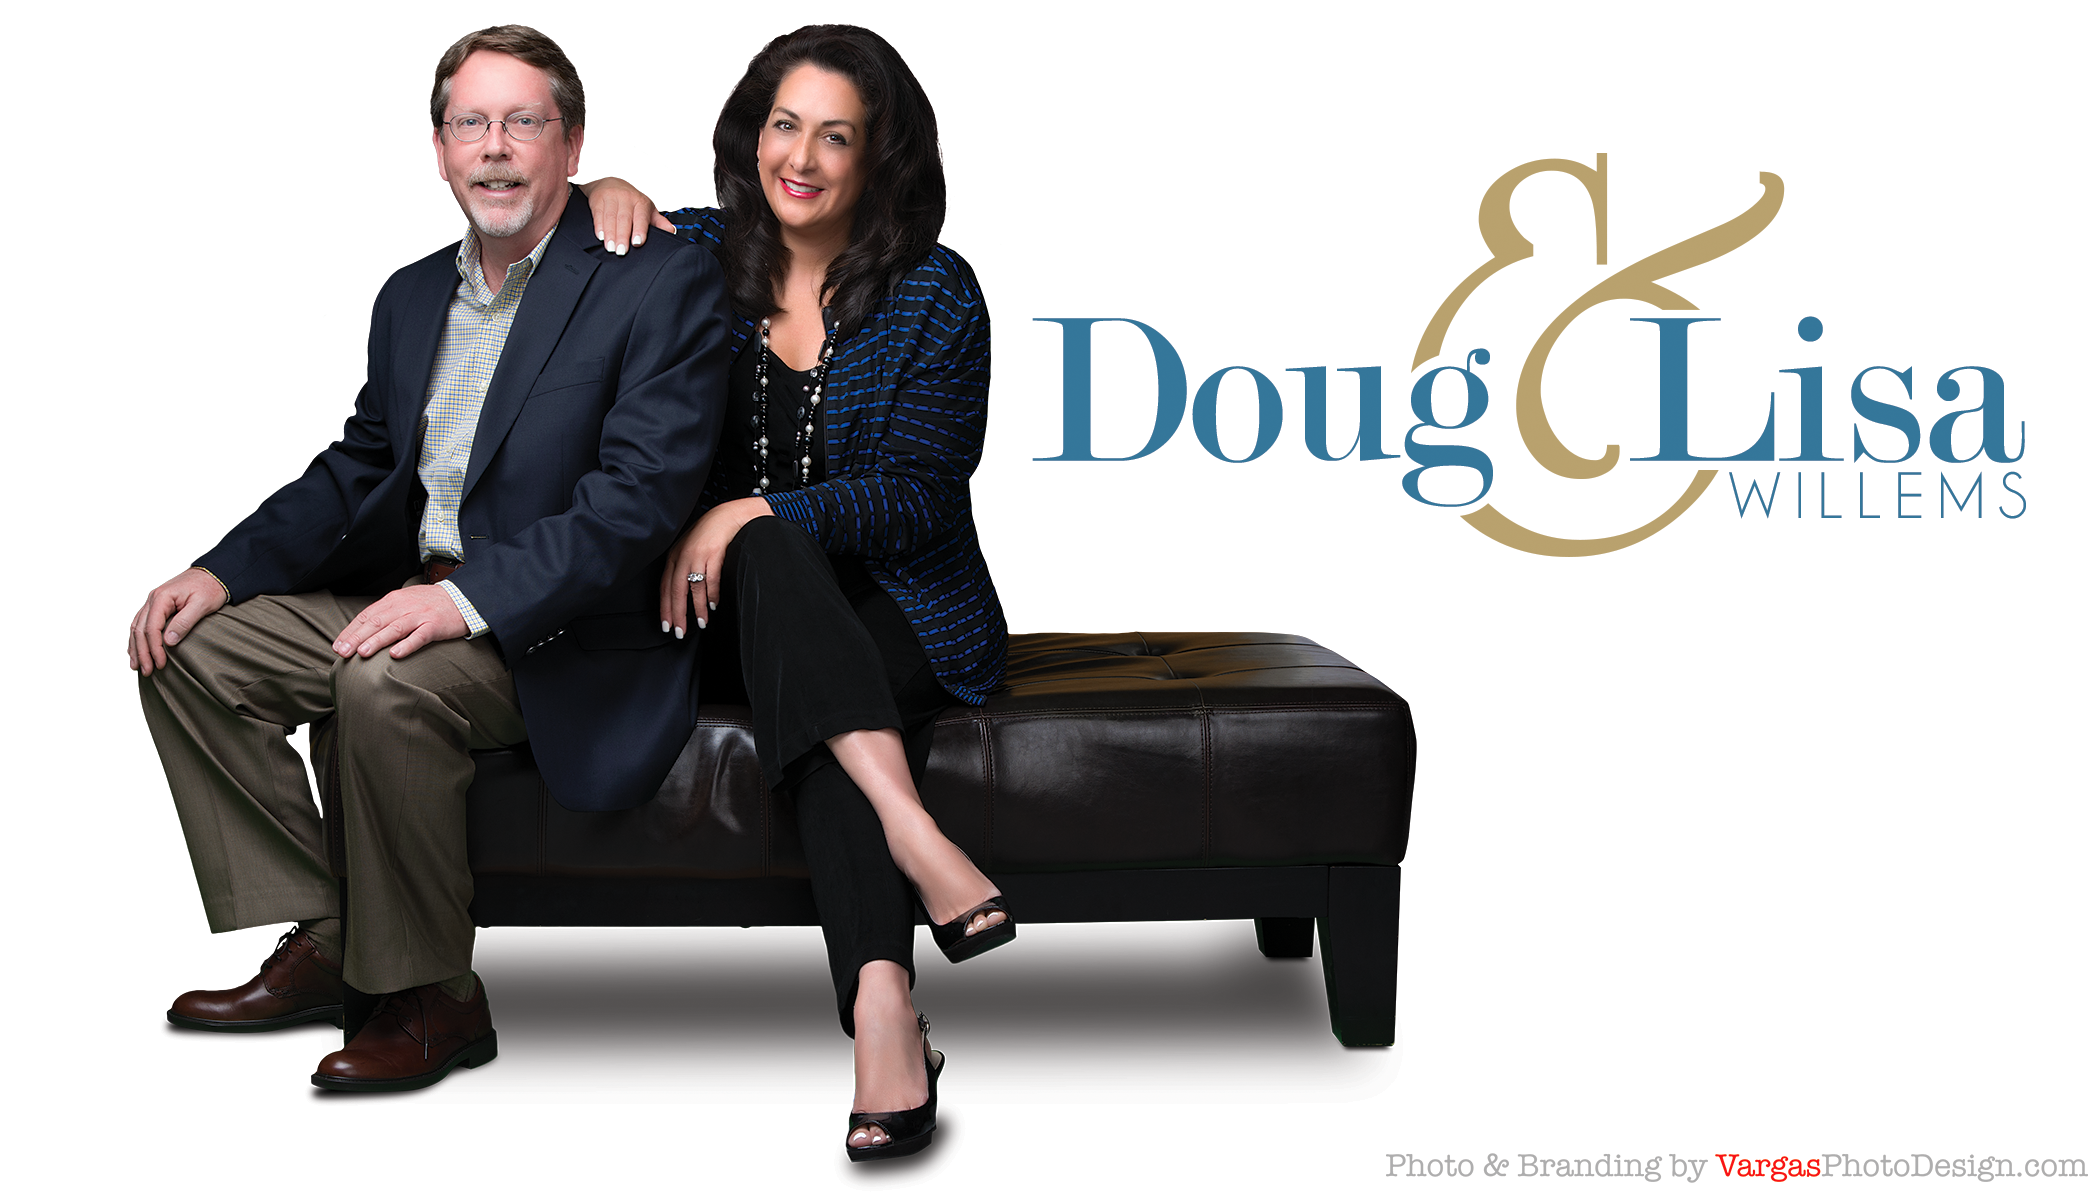 Doug-and-Lisa-Willems-Realtors-Prudential-California-Realty.png